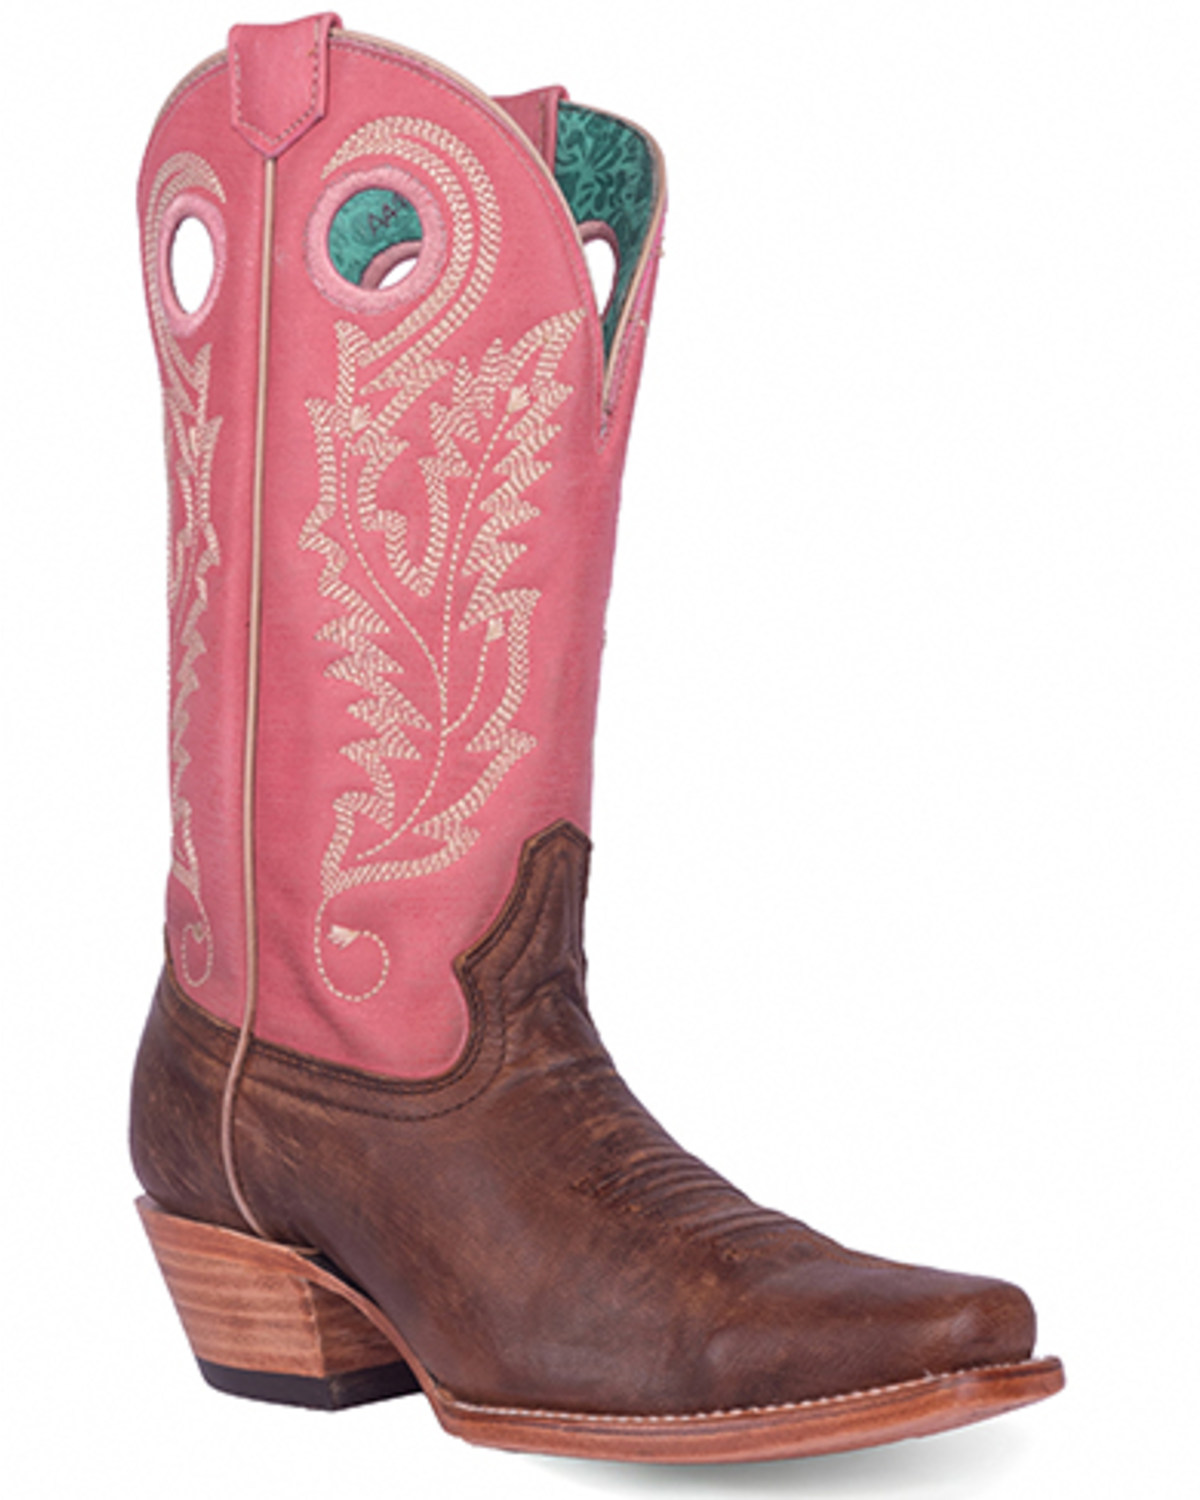 Corral Women's Embroidered Western Boots - Square Toe